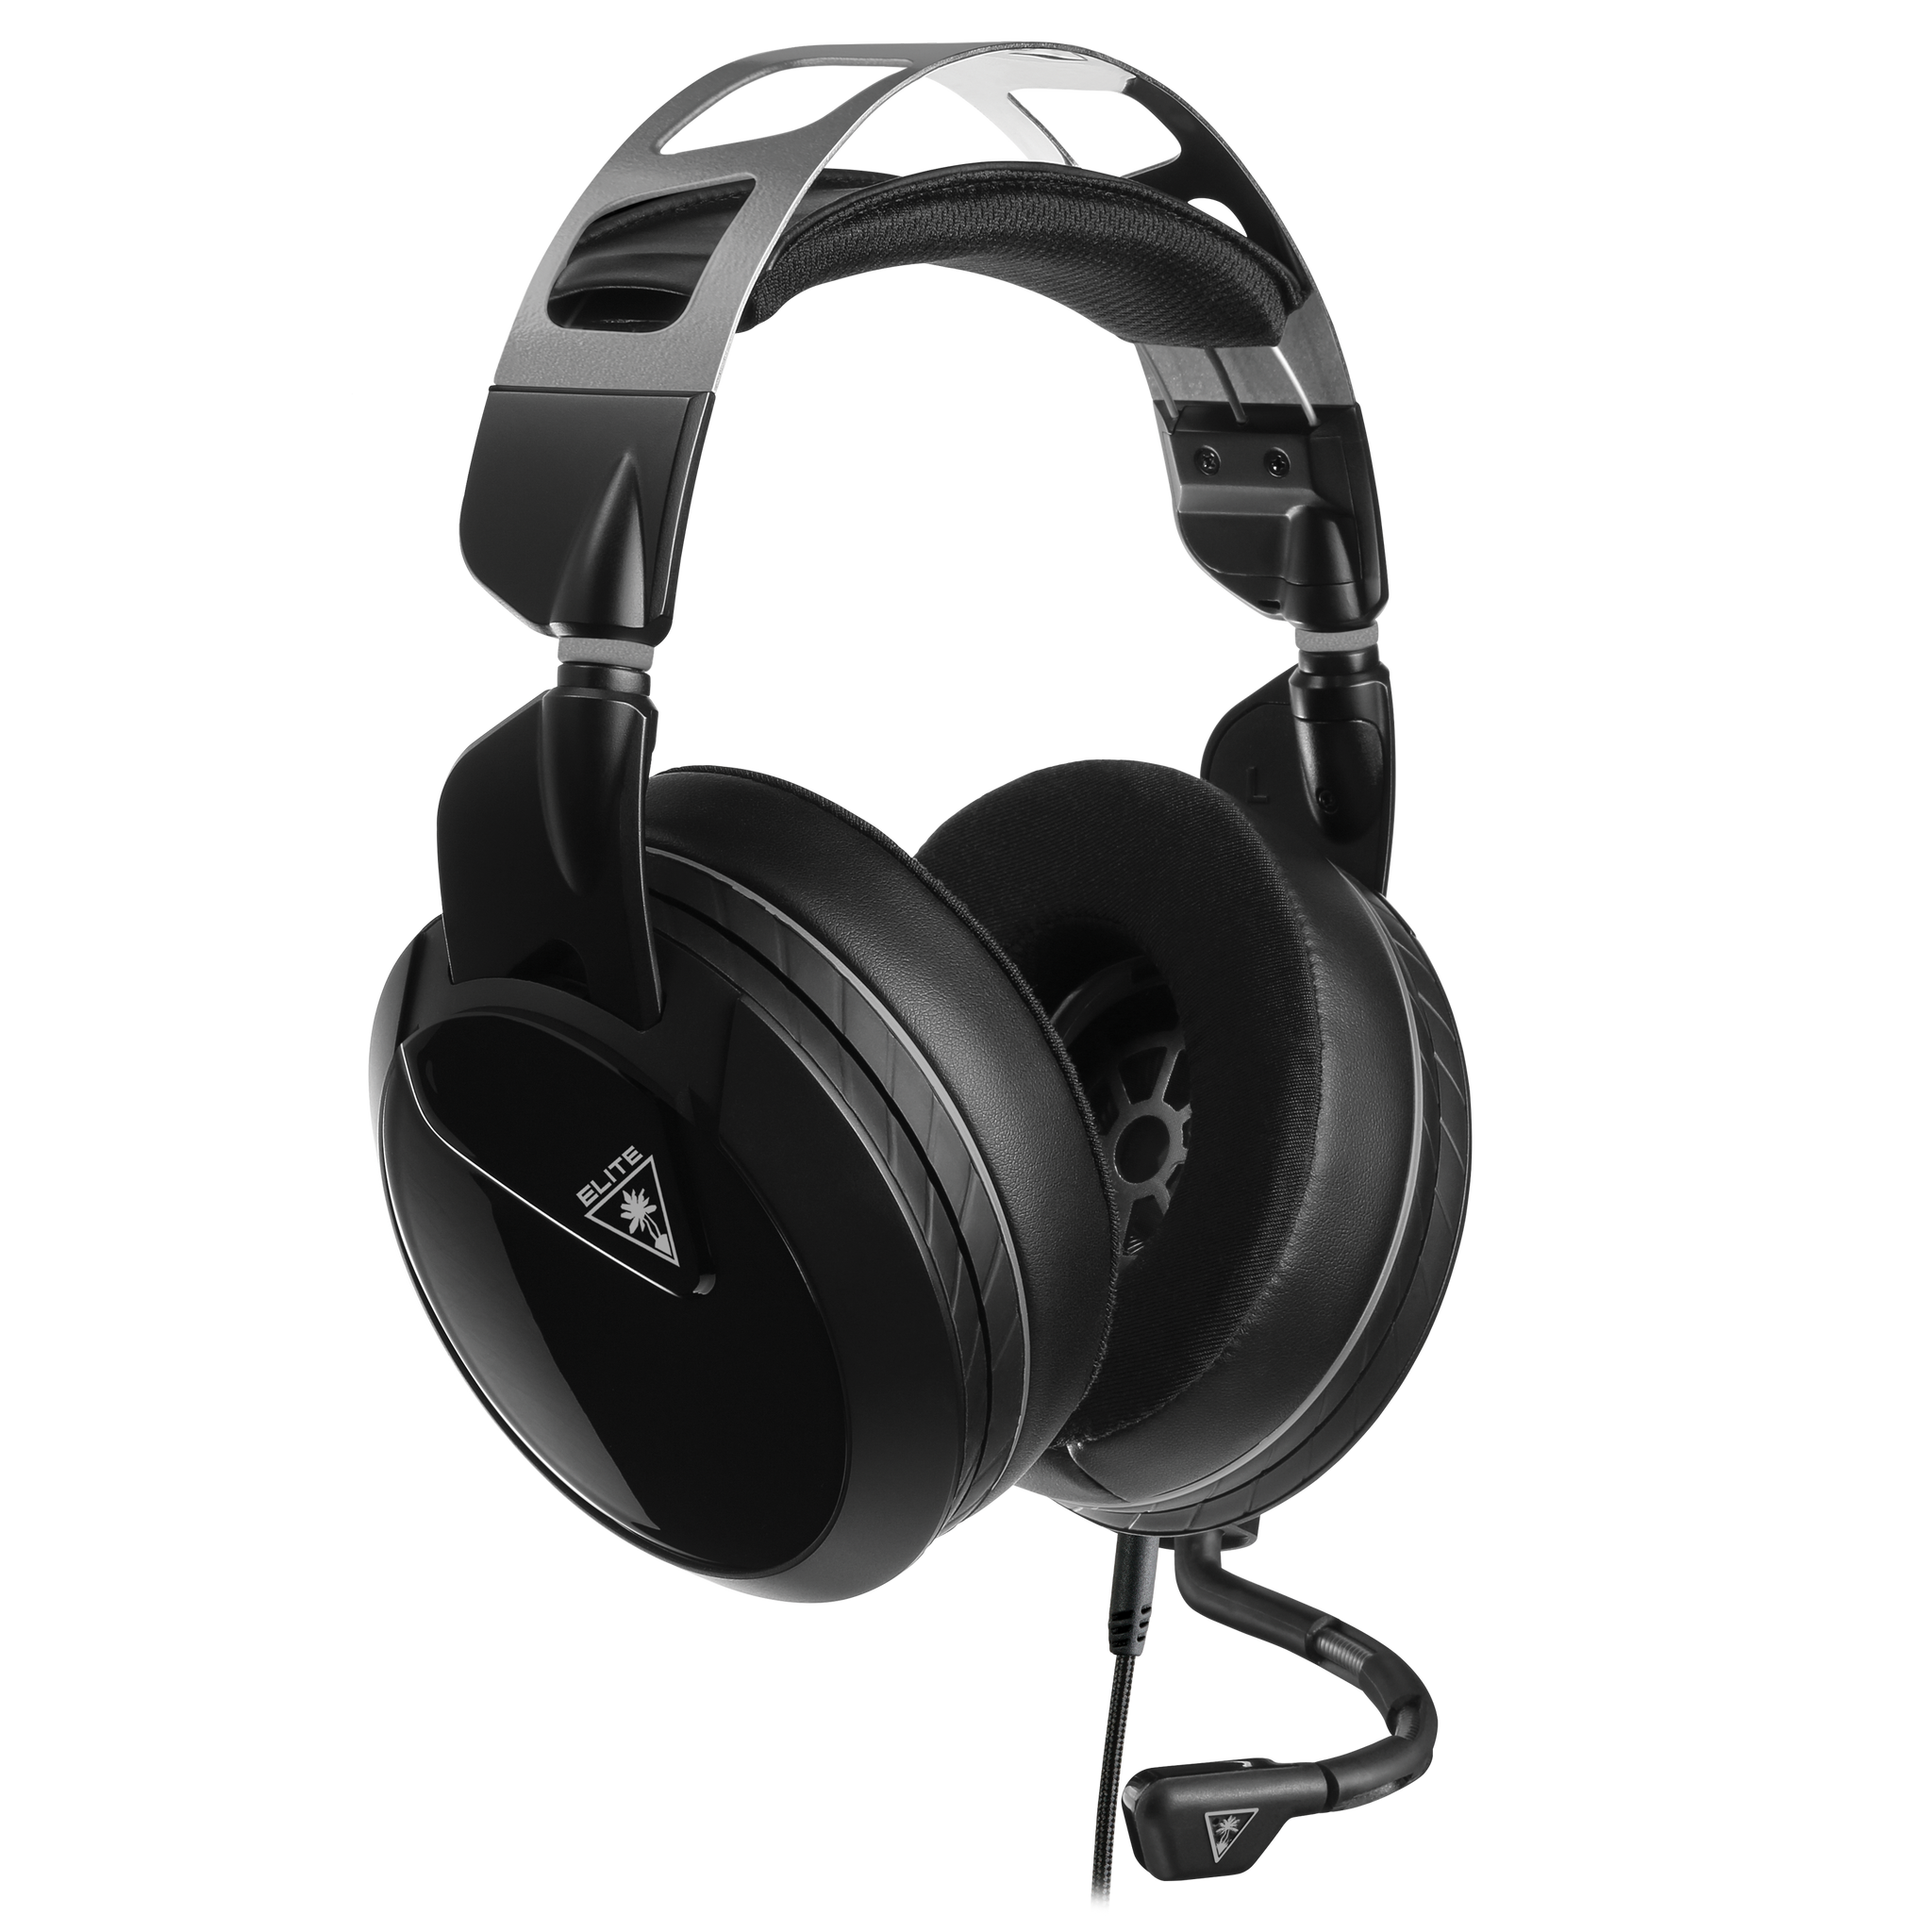 Need a Great Call of Duty Headset? Get the Best Headset for Call of Du